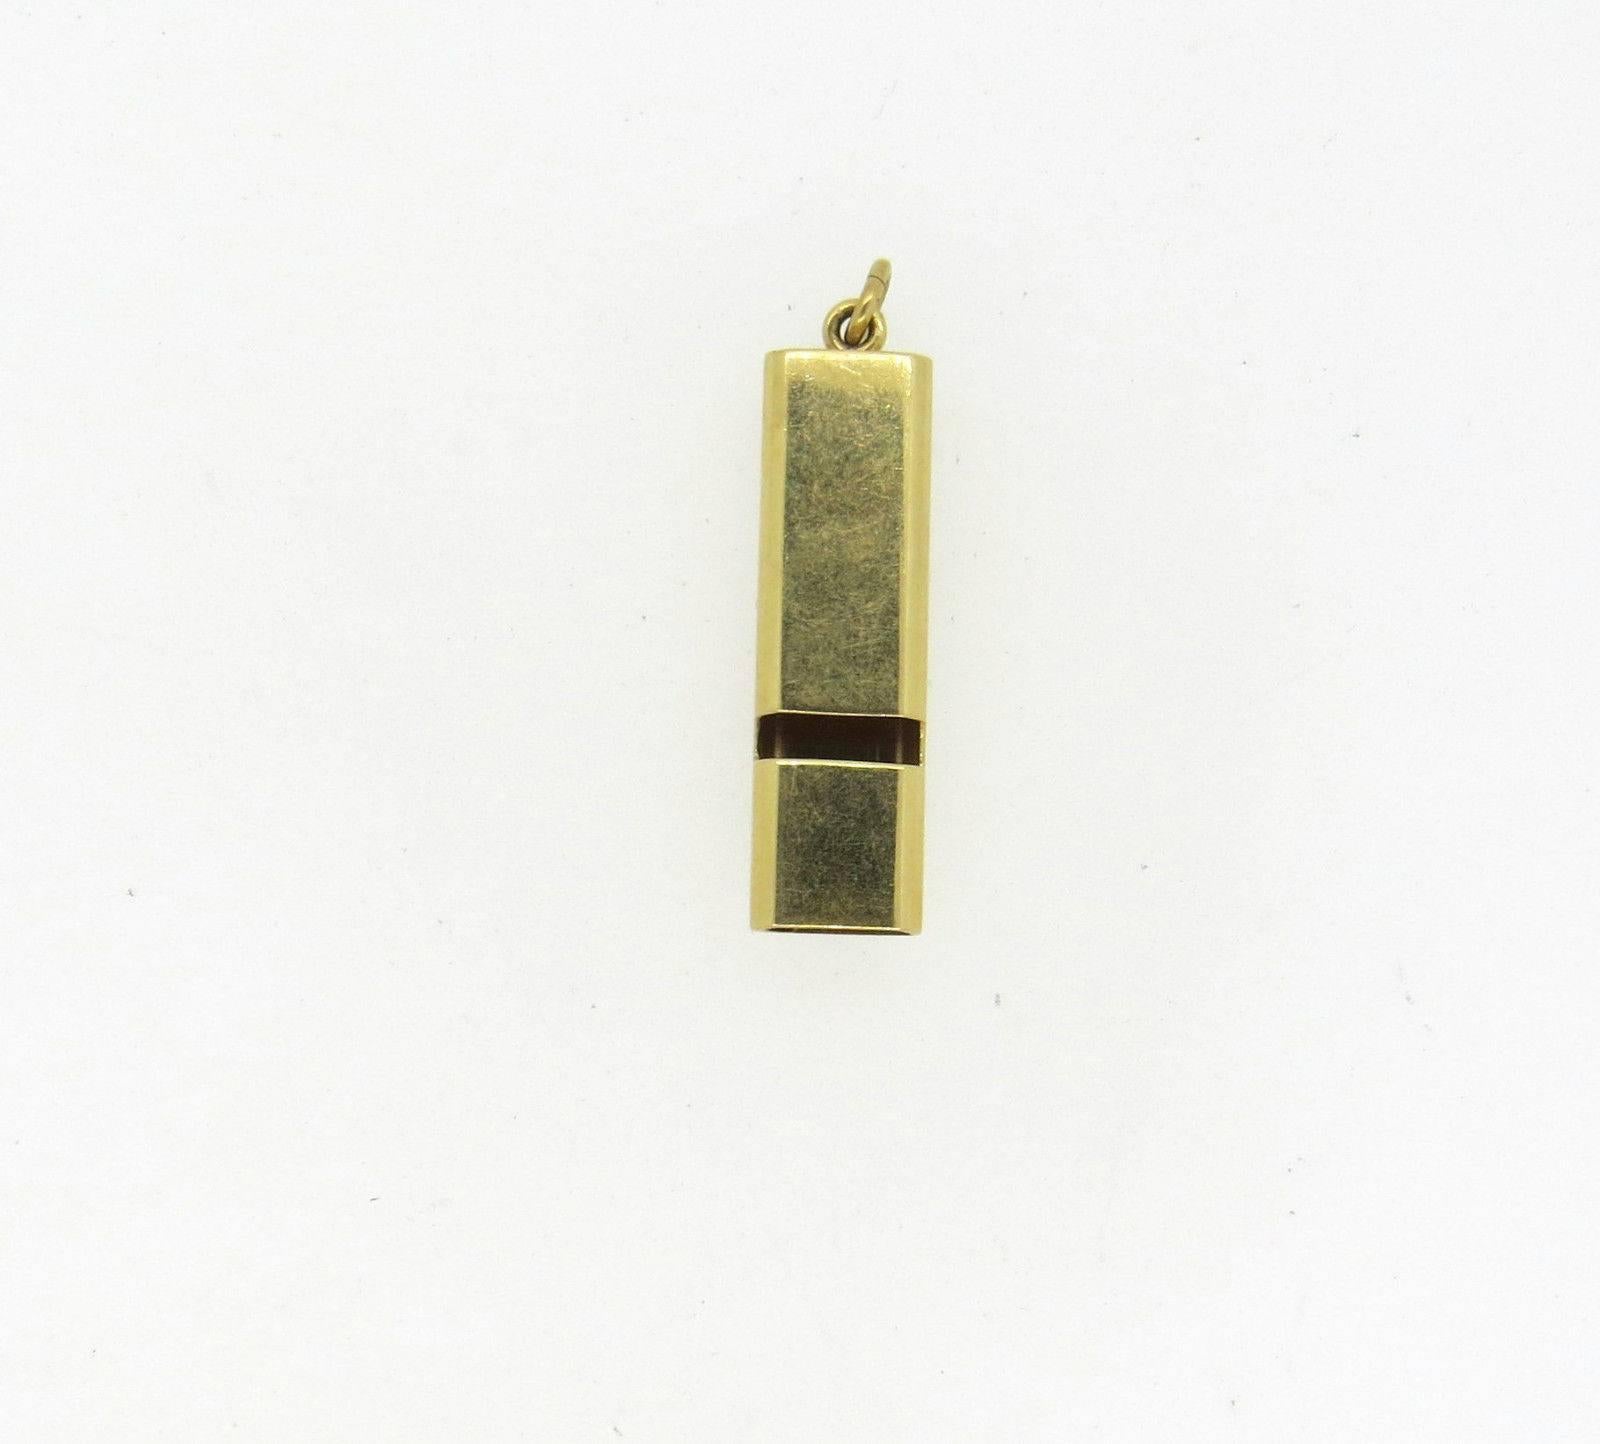 A 14k yellow gold working whistle charm by Tiffany & Co.  The charm measures 40mm x 10.5mm x 6.7mm and weighs 6.2 grams. Marked: Tiffany & Co 14k.